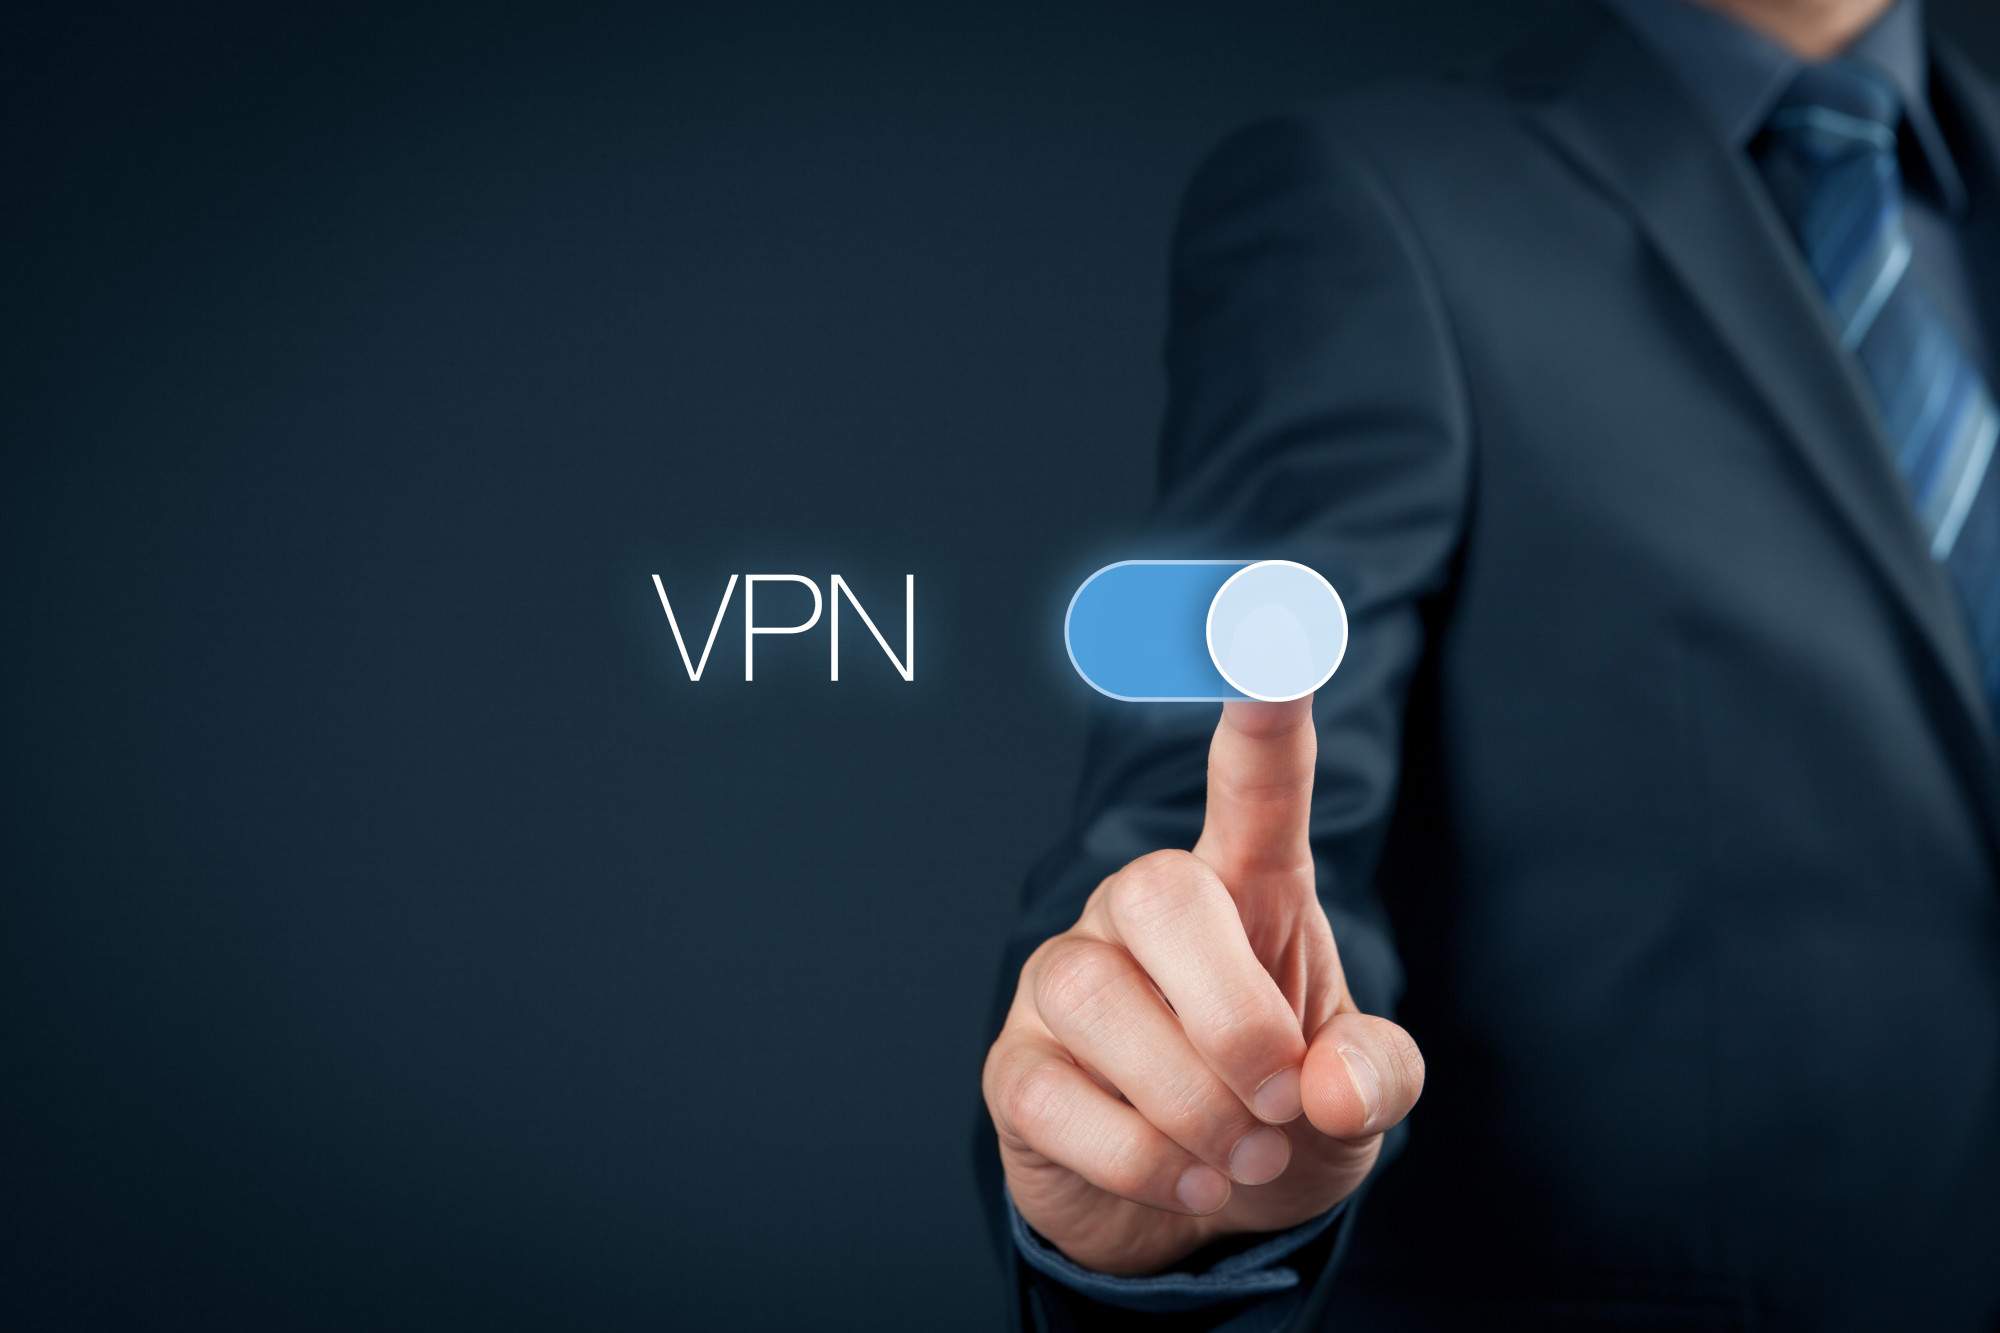 Proxy Server vs Vpn: What Are the Differences?